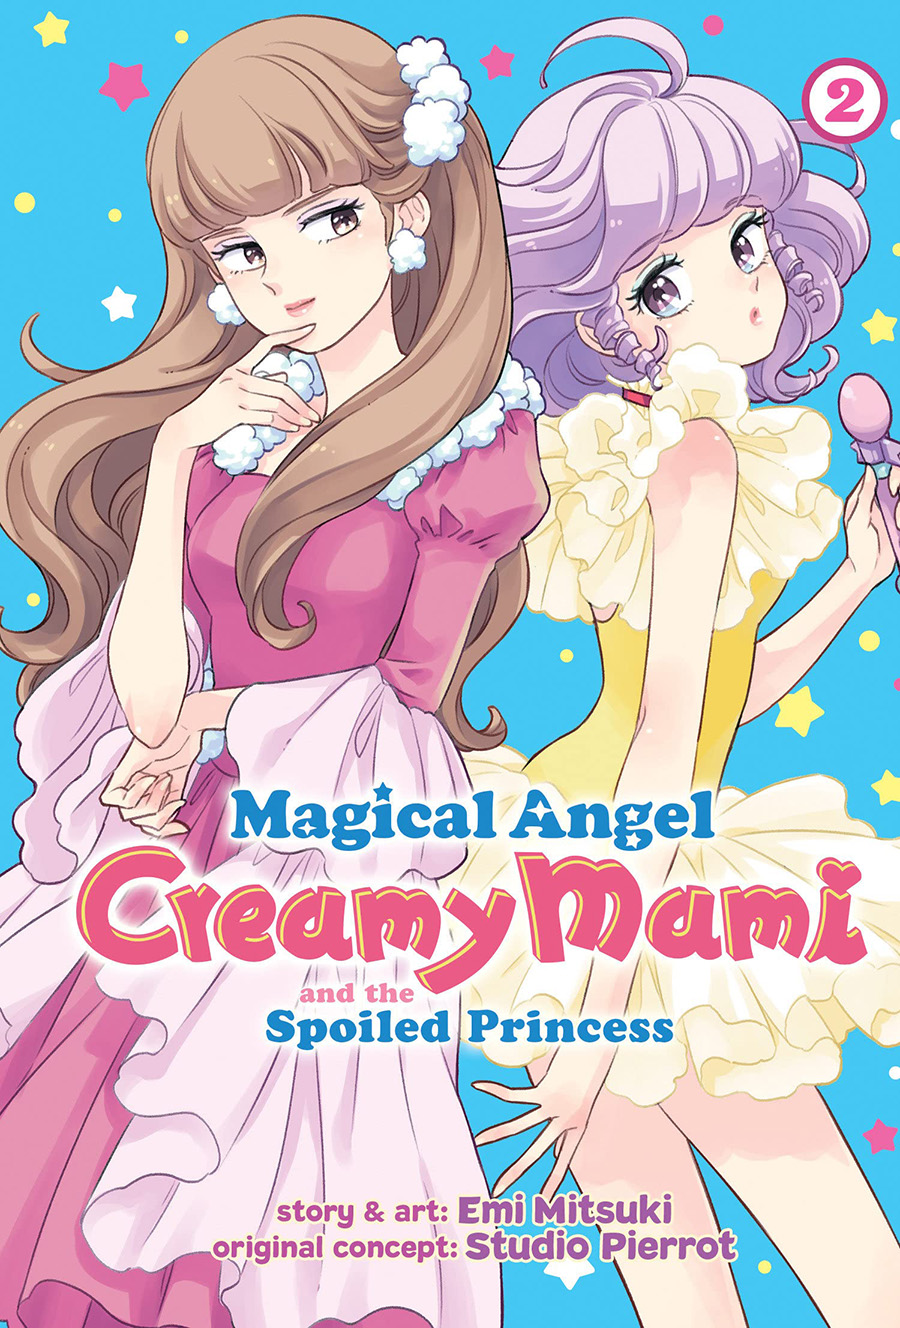 Magical Angel Creamy Mami And The Spoiled Princess Vol 2 GN